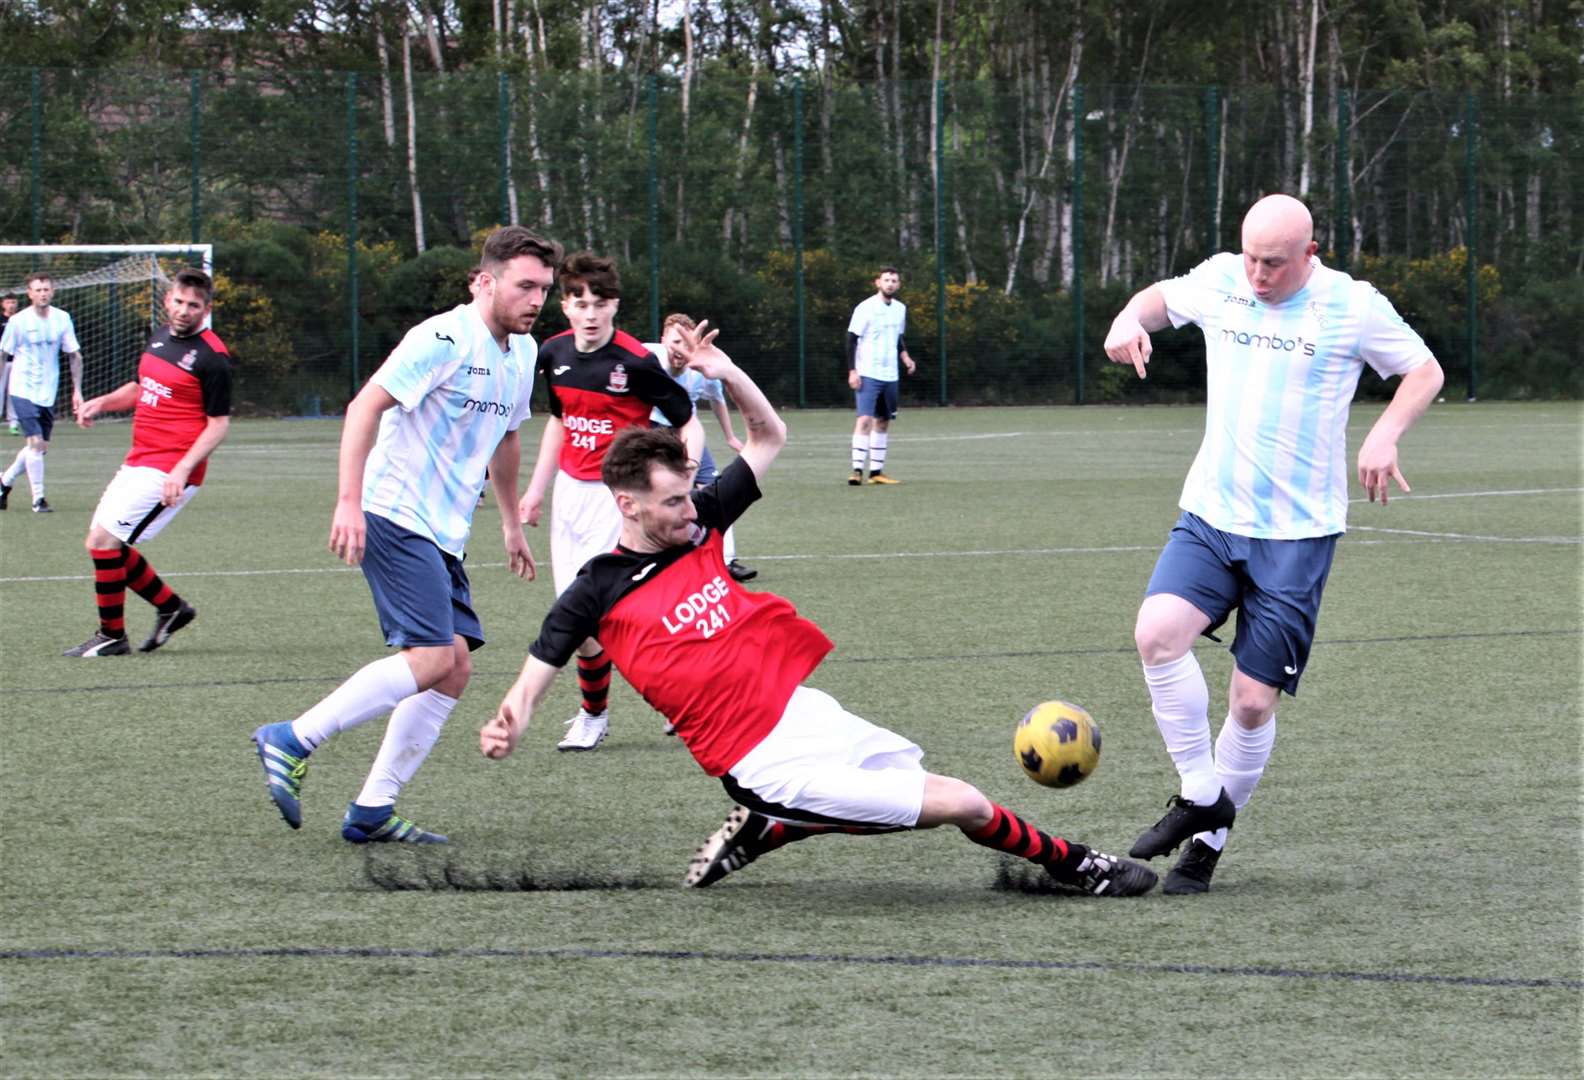 Aviemore’s David Robertson (right) is on the receiving end of a strong tackle on Tuesday night.